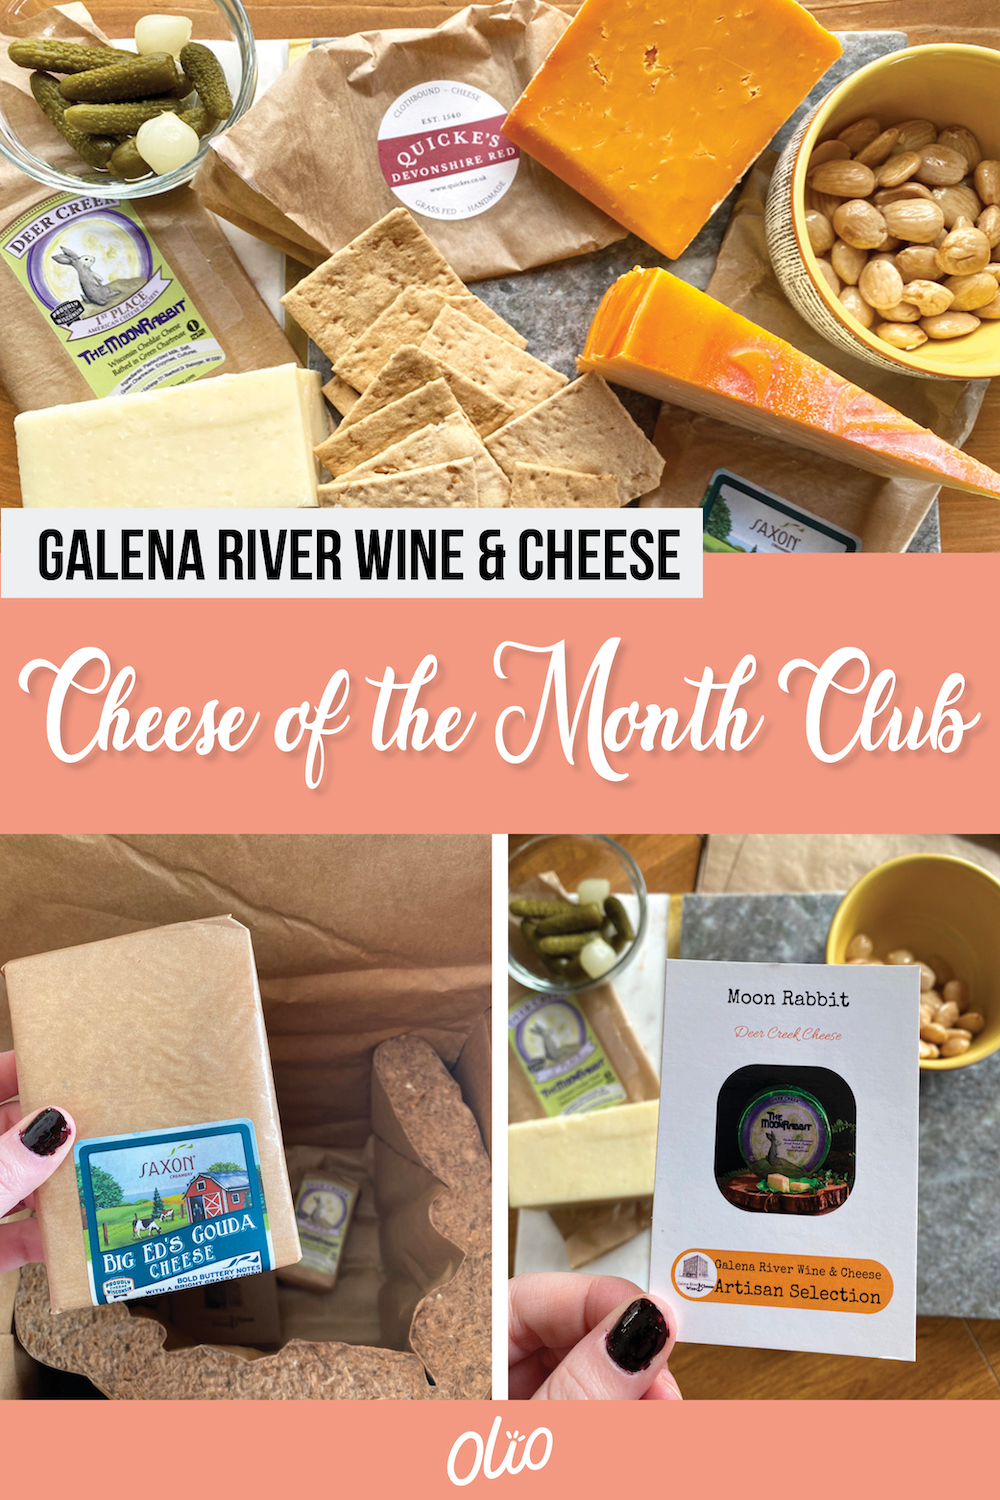 Whether you're shopping for a Midwest gift or just want to treat yourself, a Cheese of the Month Club box from Galena River Wine & Cheese is the perfect option! Enjoy hand selected cheeses from this shop in Galena, Illinois and support a small business in the process. #Midwest #Illinois #foodie